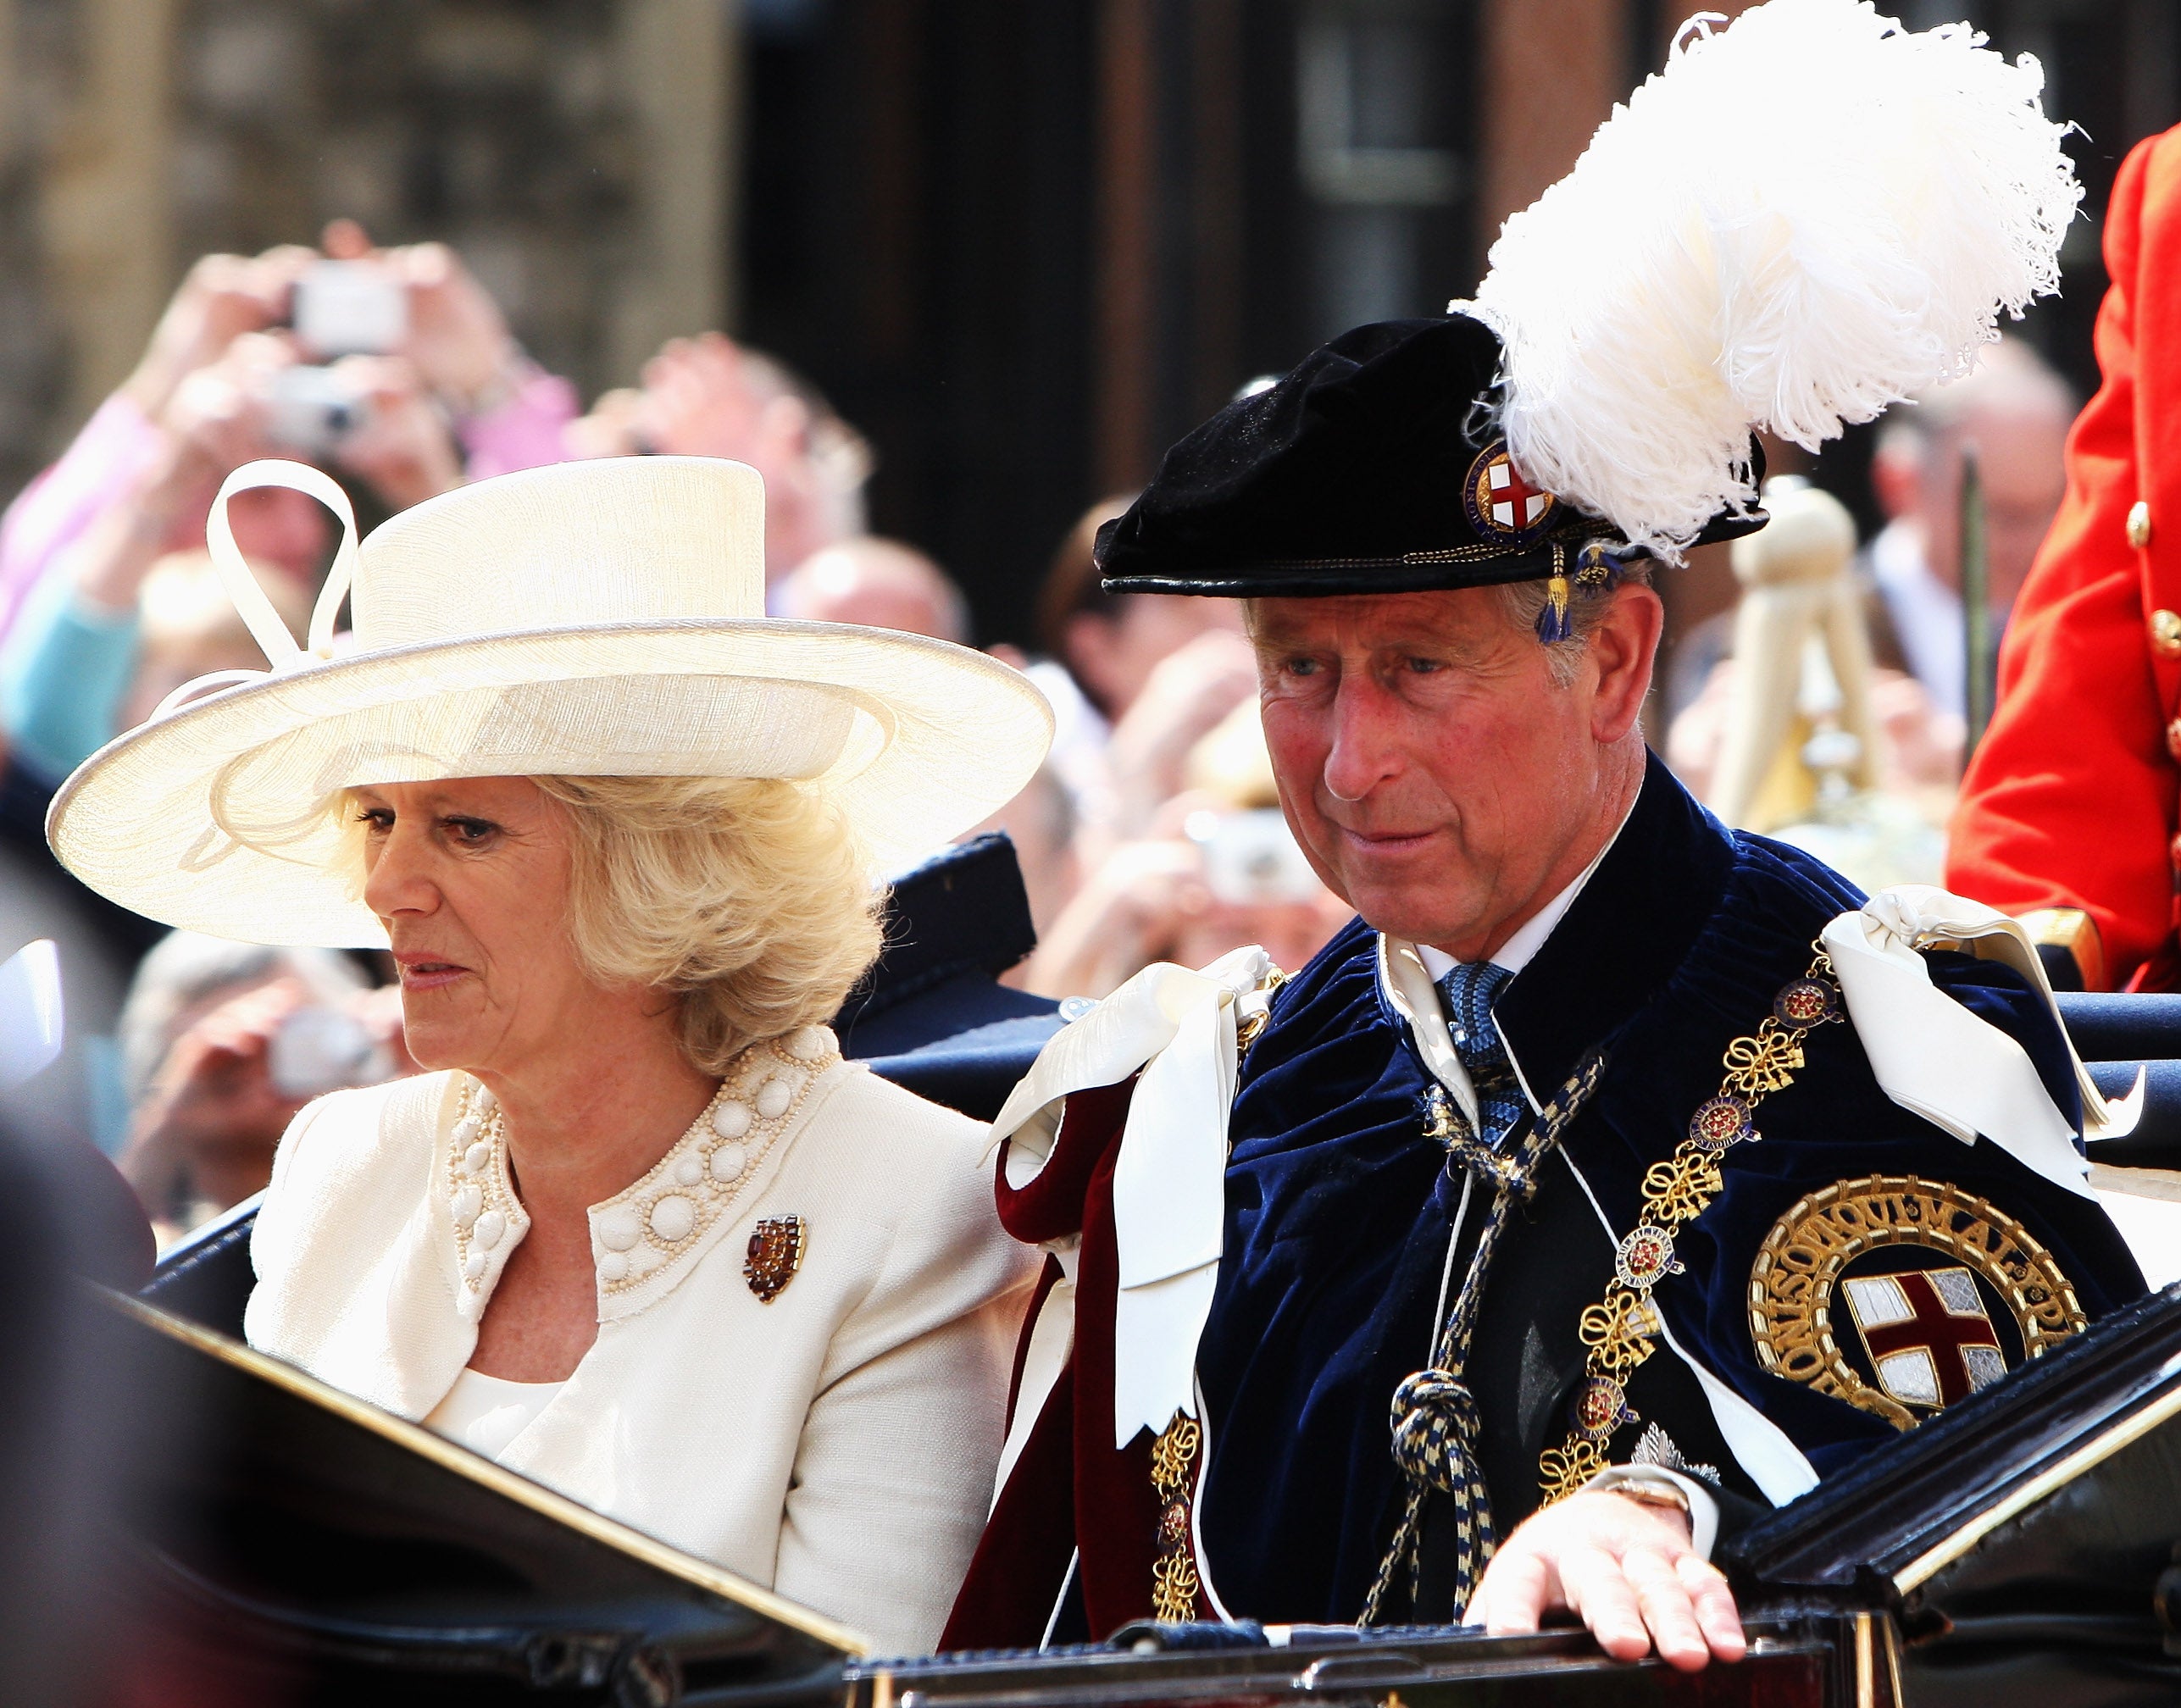 Prince Charles and the Duchess of Cornwall attend Garter Day in 2008